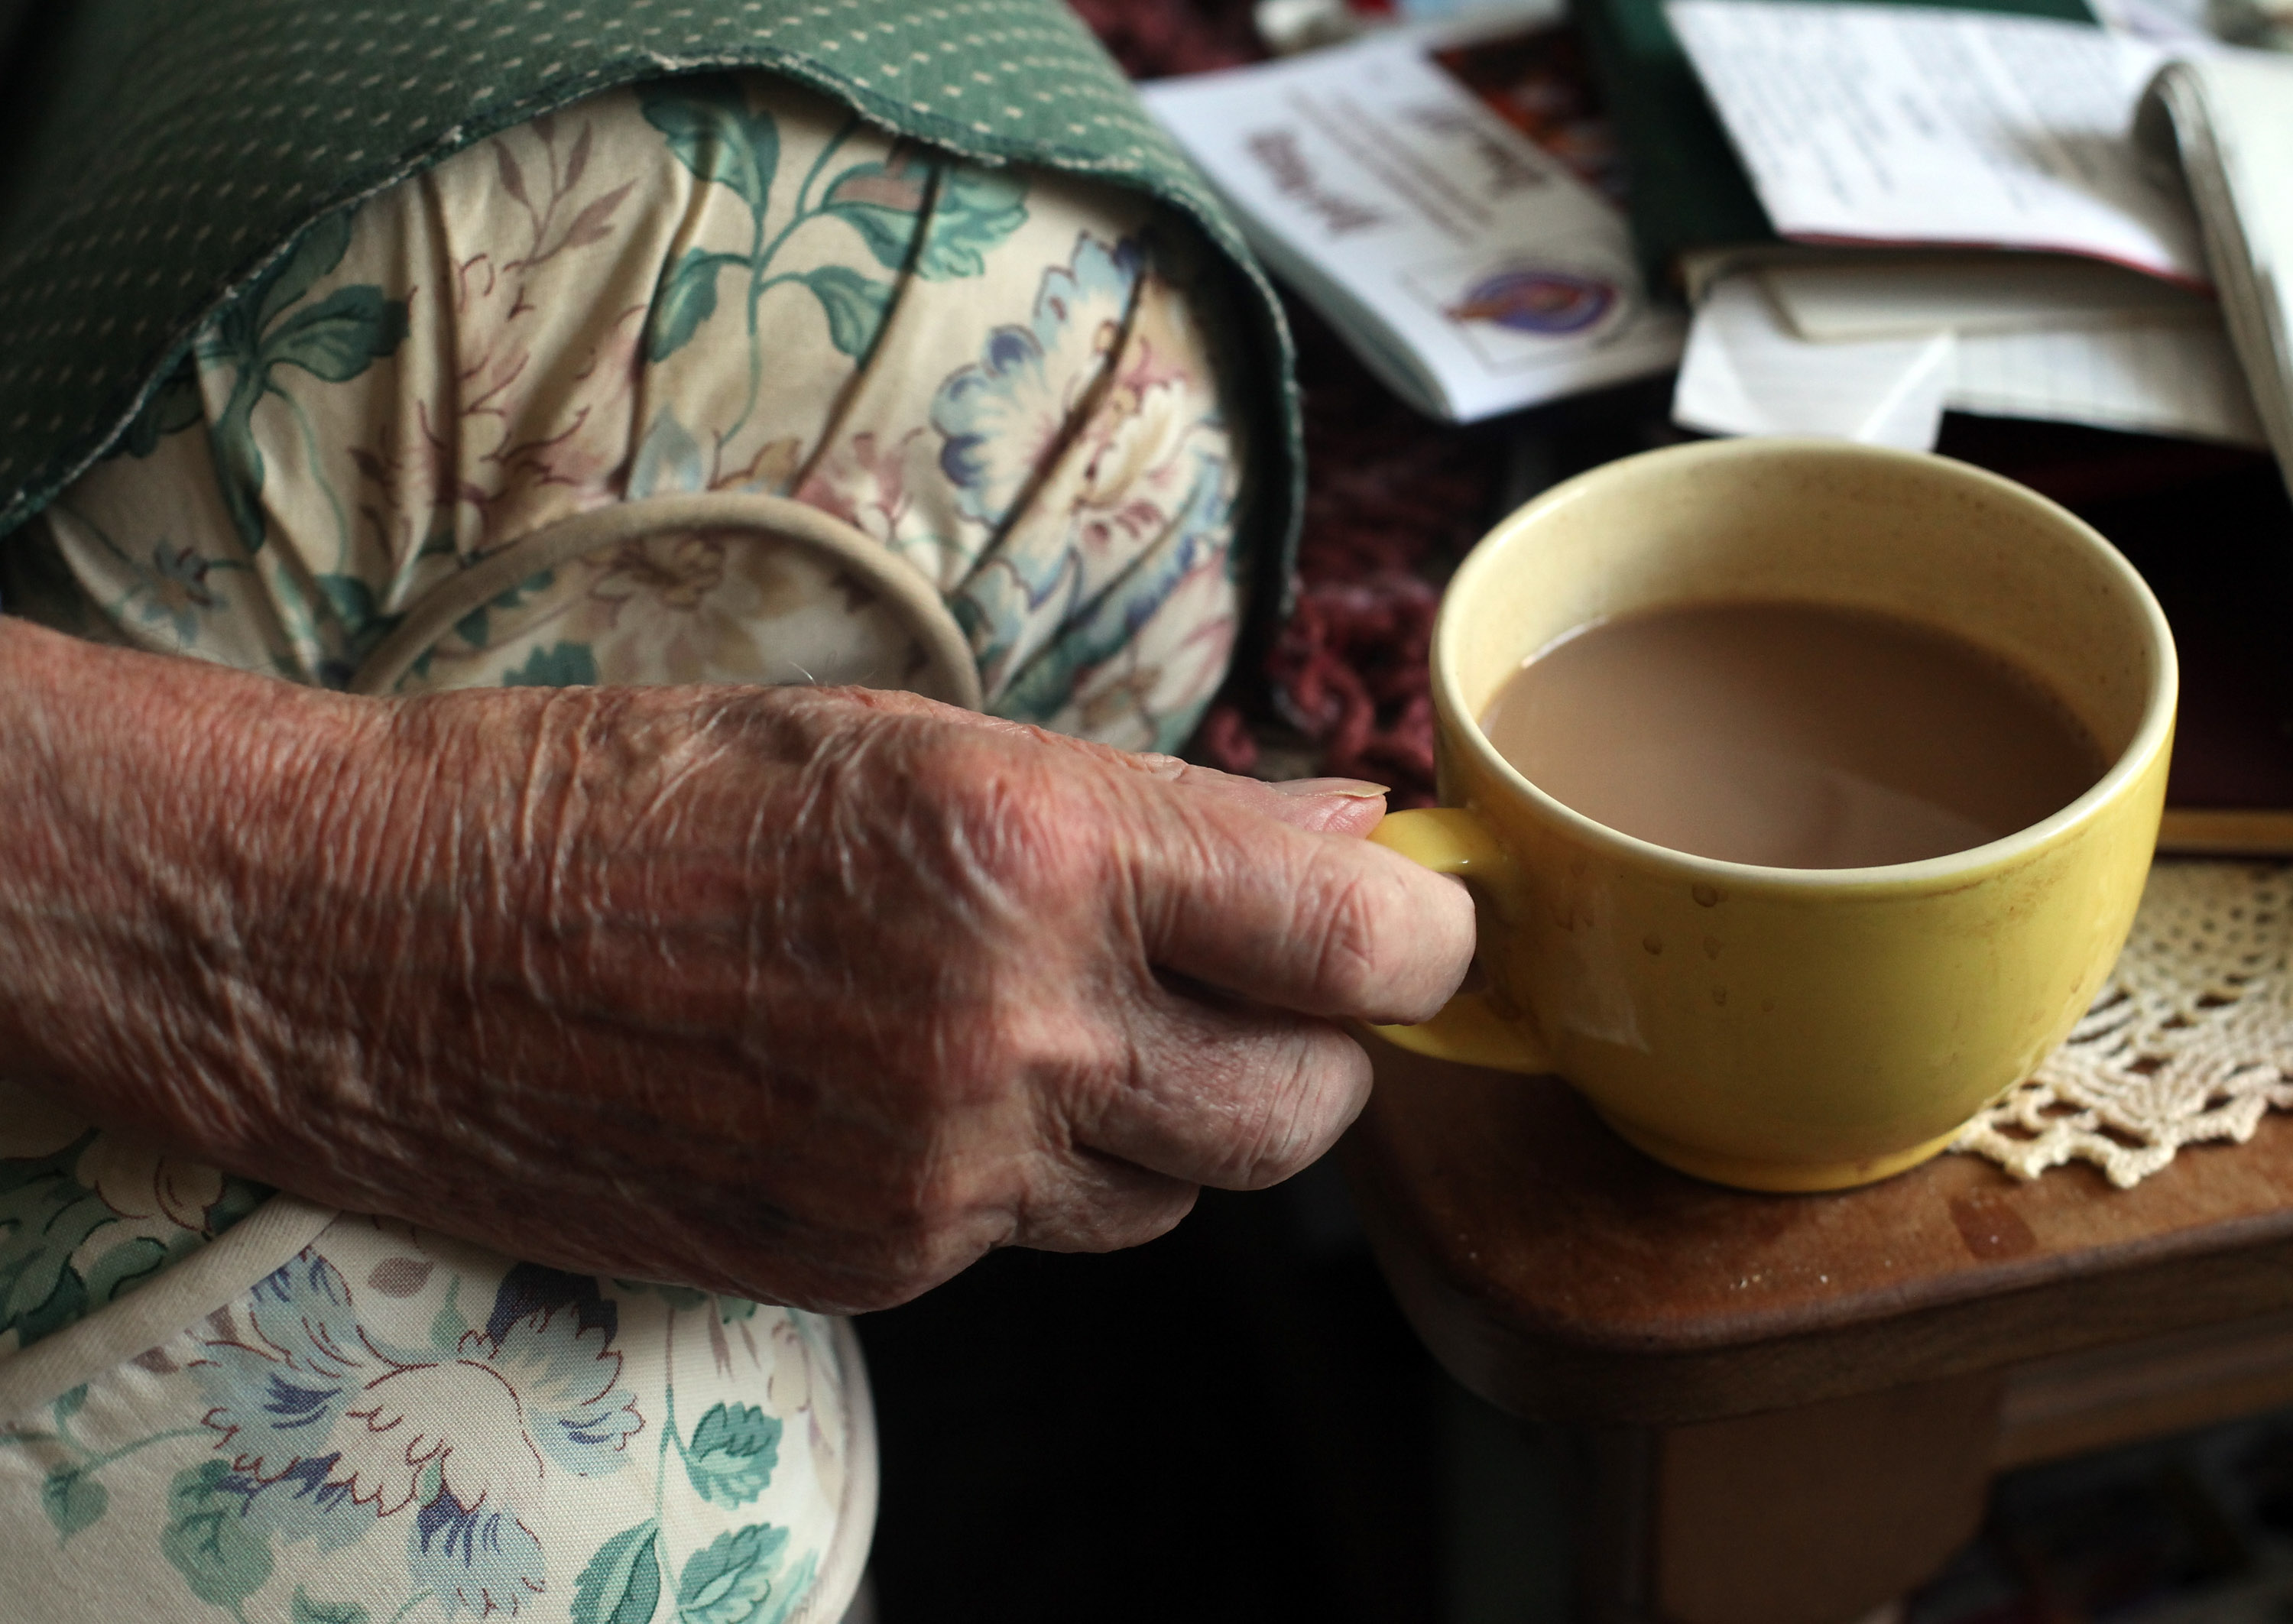 An elderly woman holding a cup of coffee | Source: Getty Images